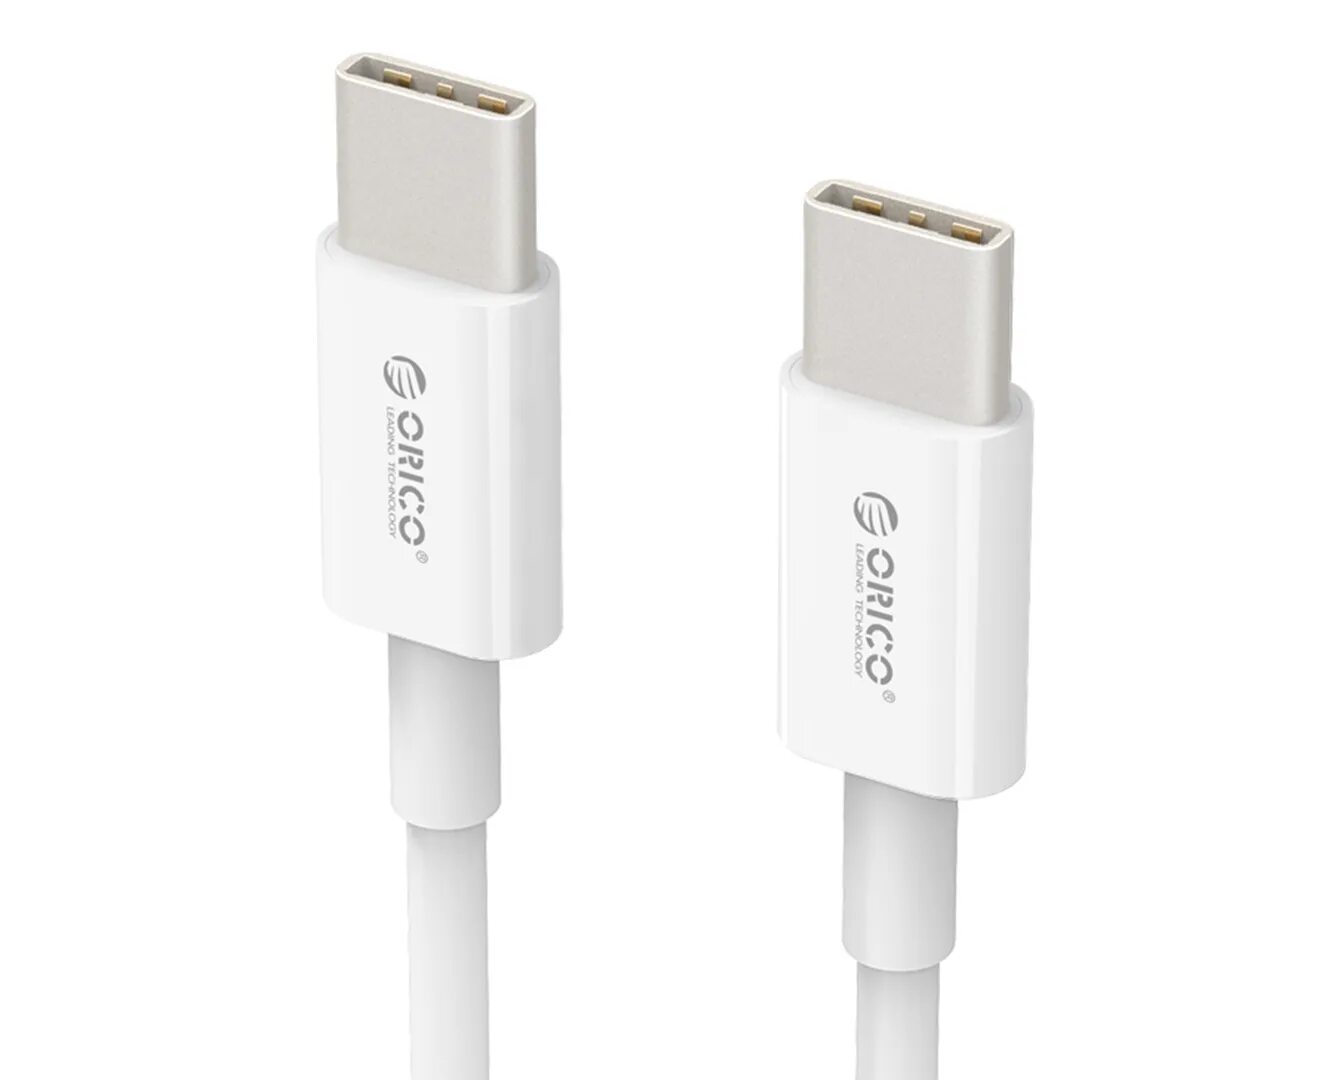 Usb c 5a. USB-C charge Cable (2m). Кабель USB 3.0 Type-c 3a fast charge White. Кабель Type c c1m sync & charge. Apple Type c Cable 2m.